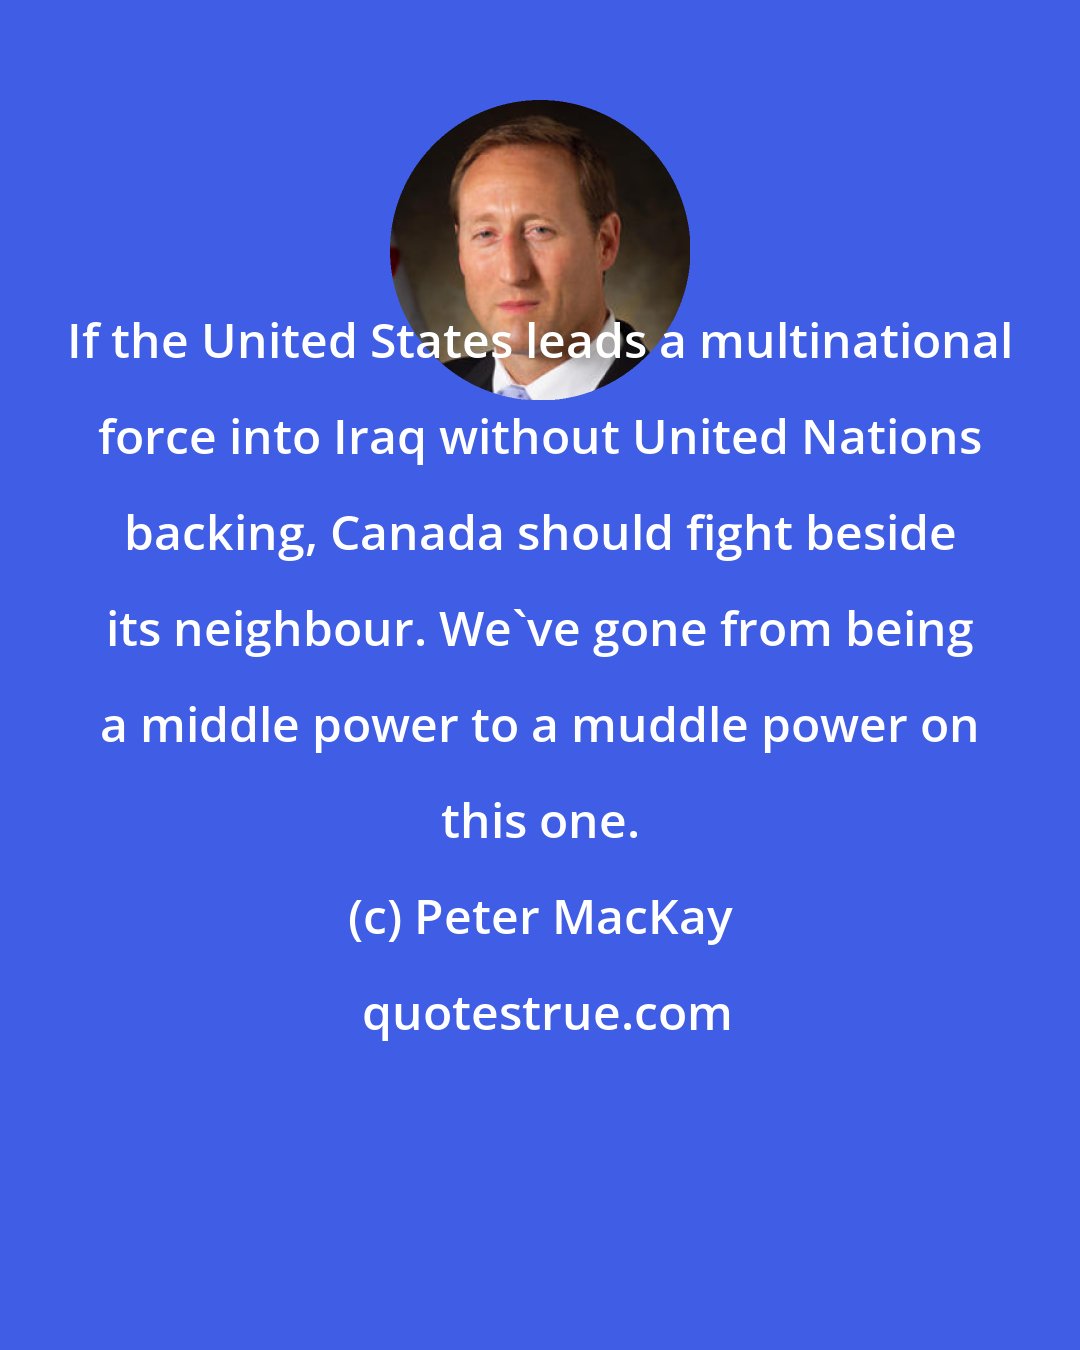 Peter MacKay: If the United States leads a multinational force into Iraq without United Nations backing, Canada should fight beside its neighbour. We've gone from being a middle power to a muddle power on this one.